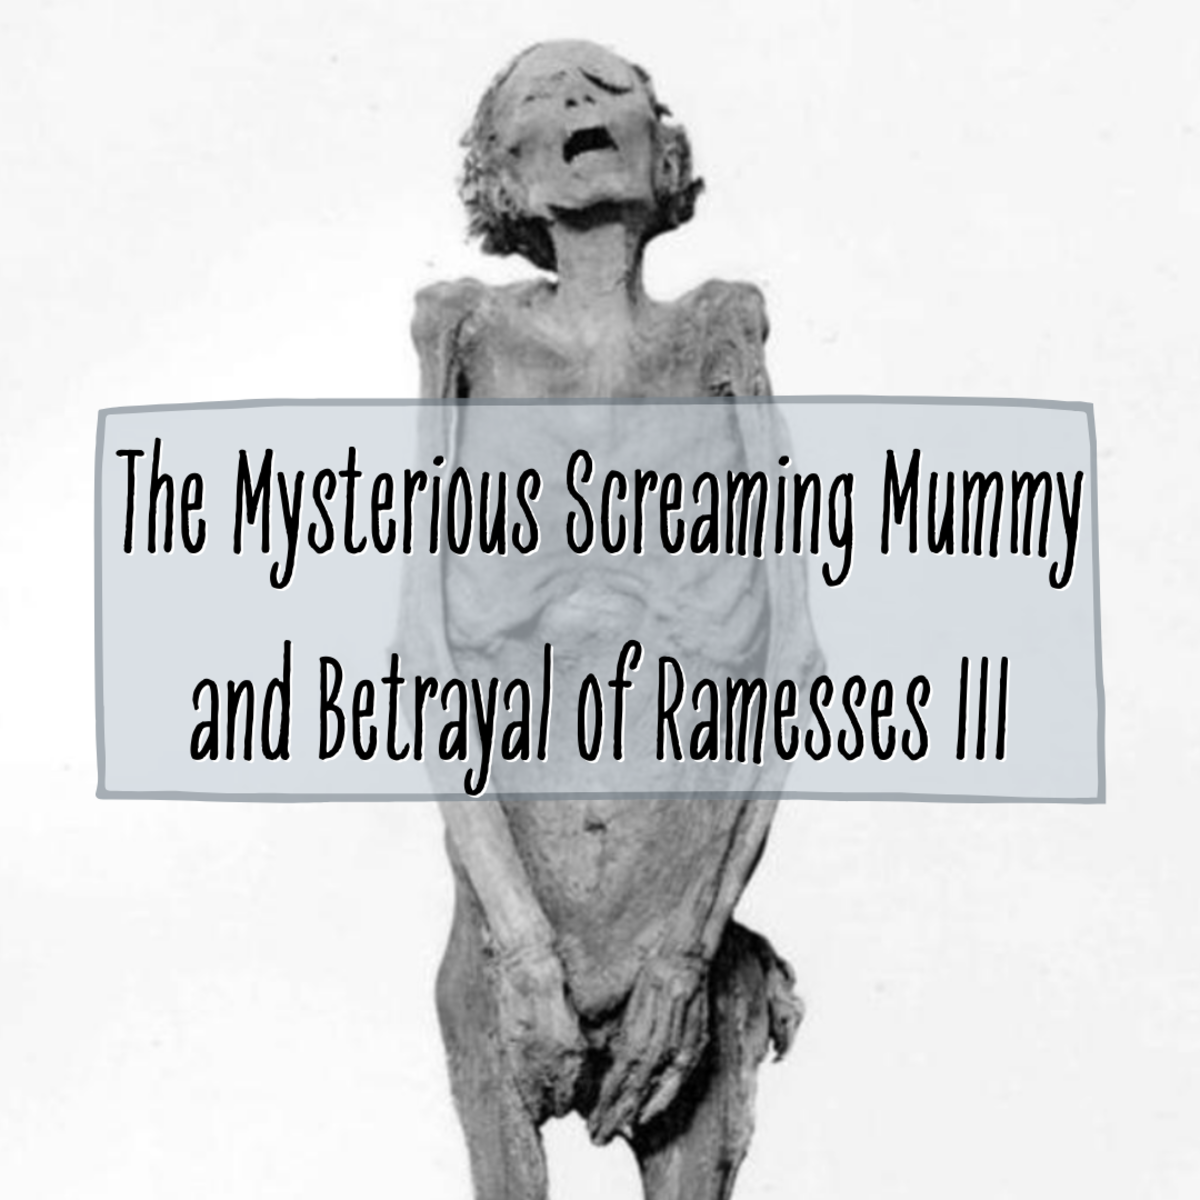 The Mysterious Screaming Mummy and Betrayal of Ramesses III